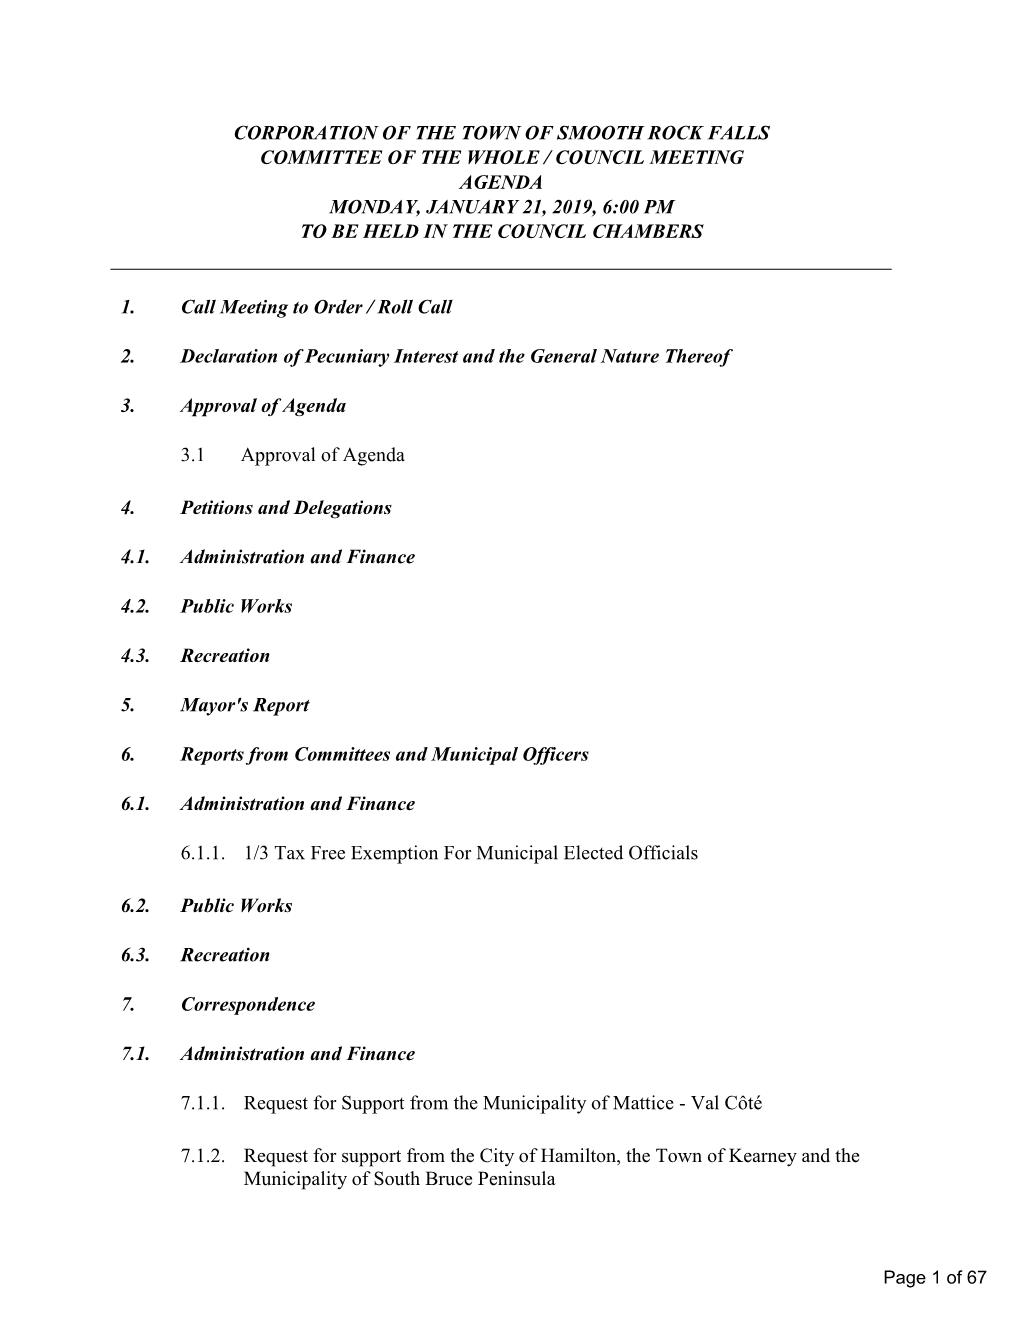 Committee of the Whole / Council Meeting Agenda Monday, January 21, 2019, 6:00 Pm to Be Held in the Council Chambers